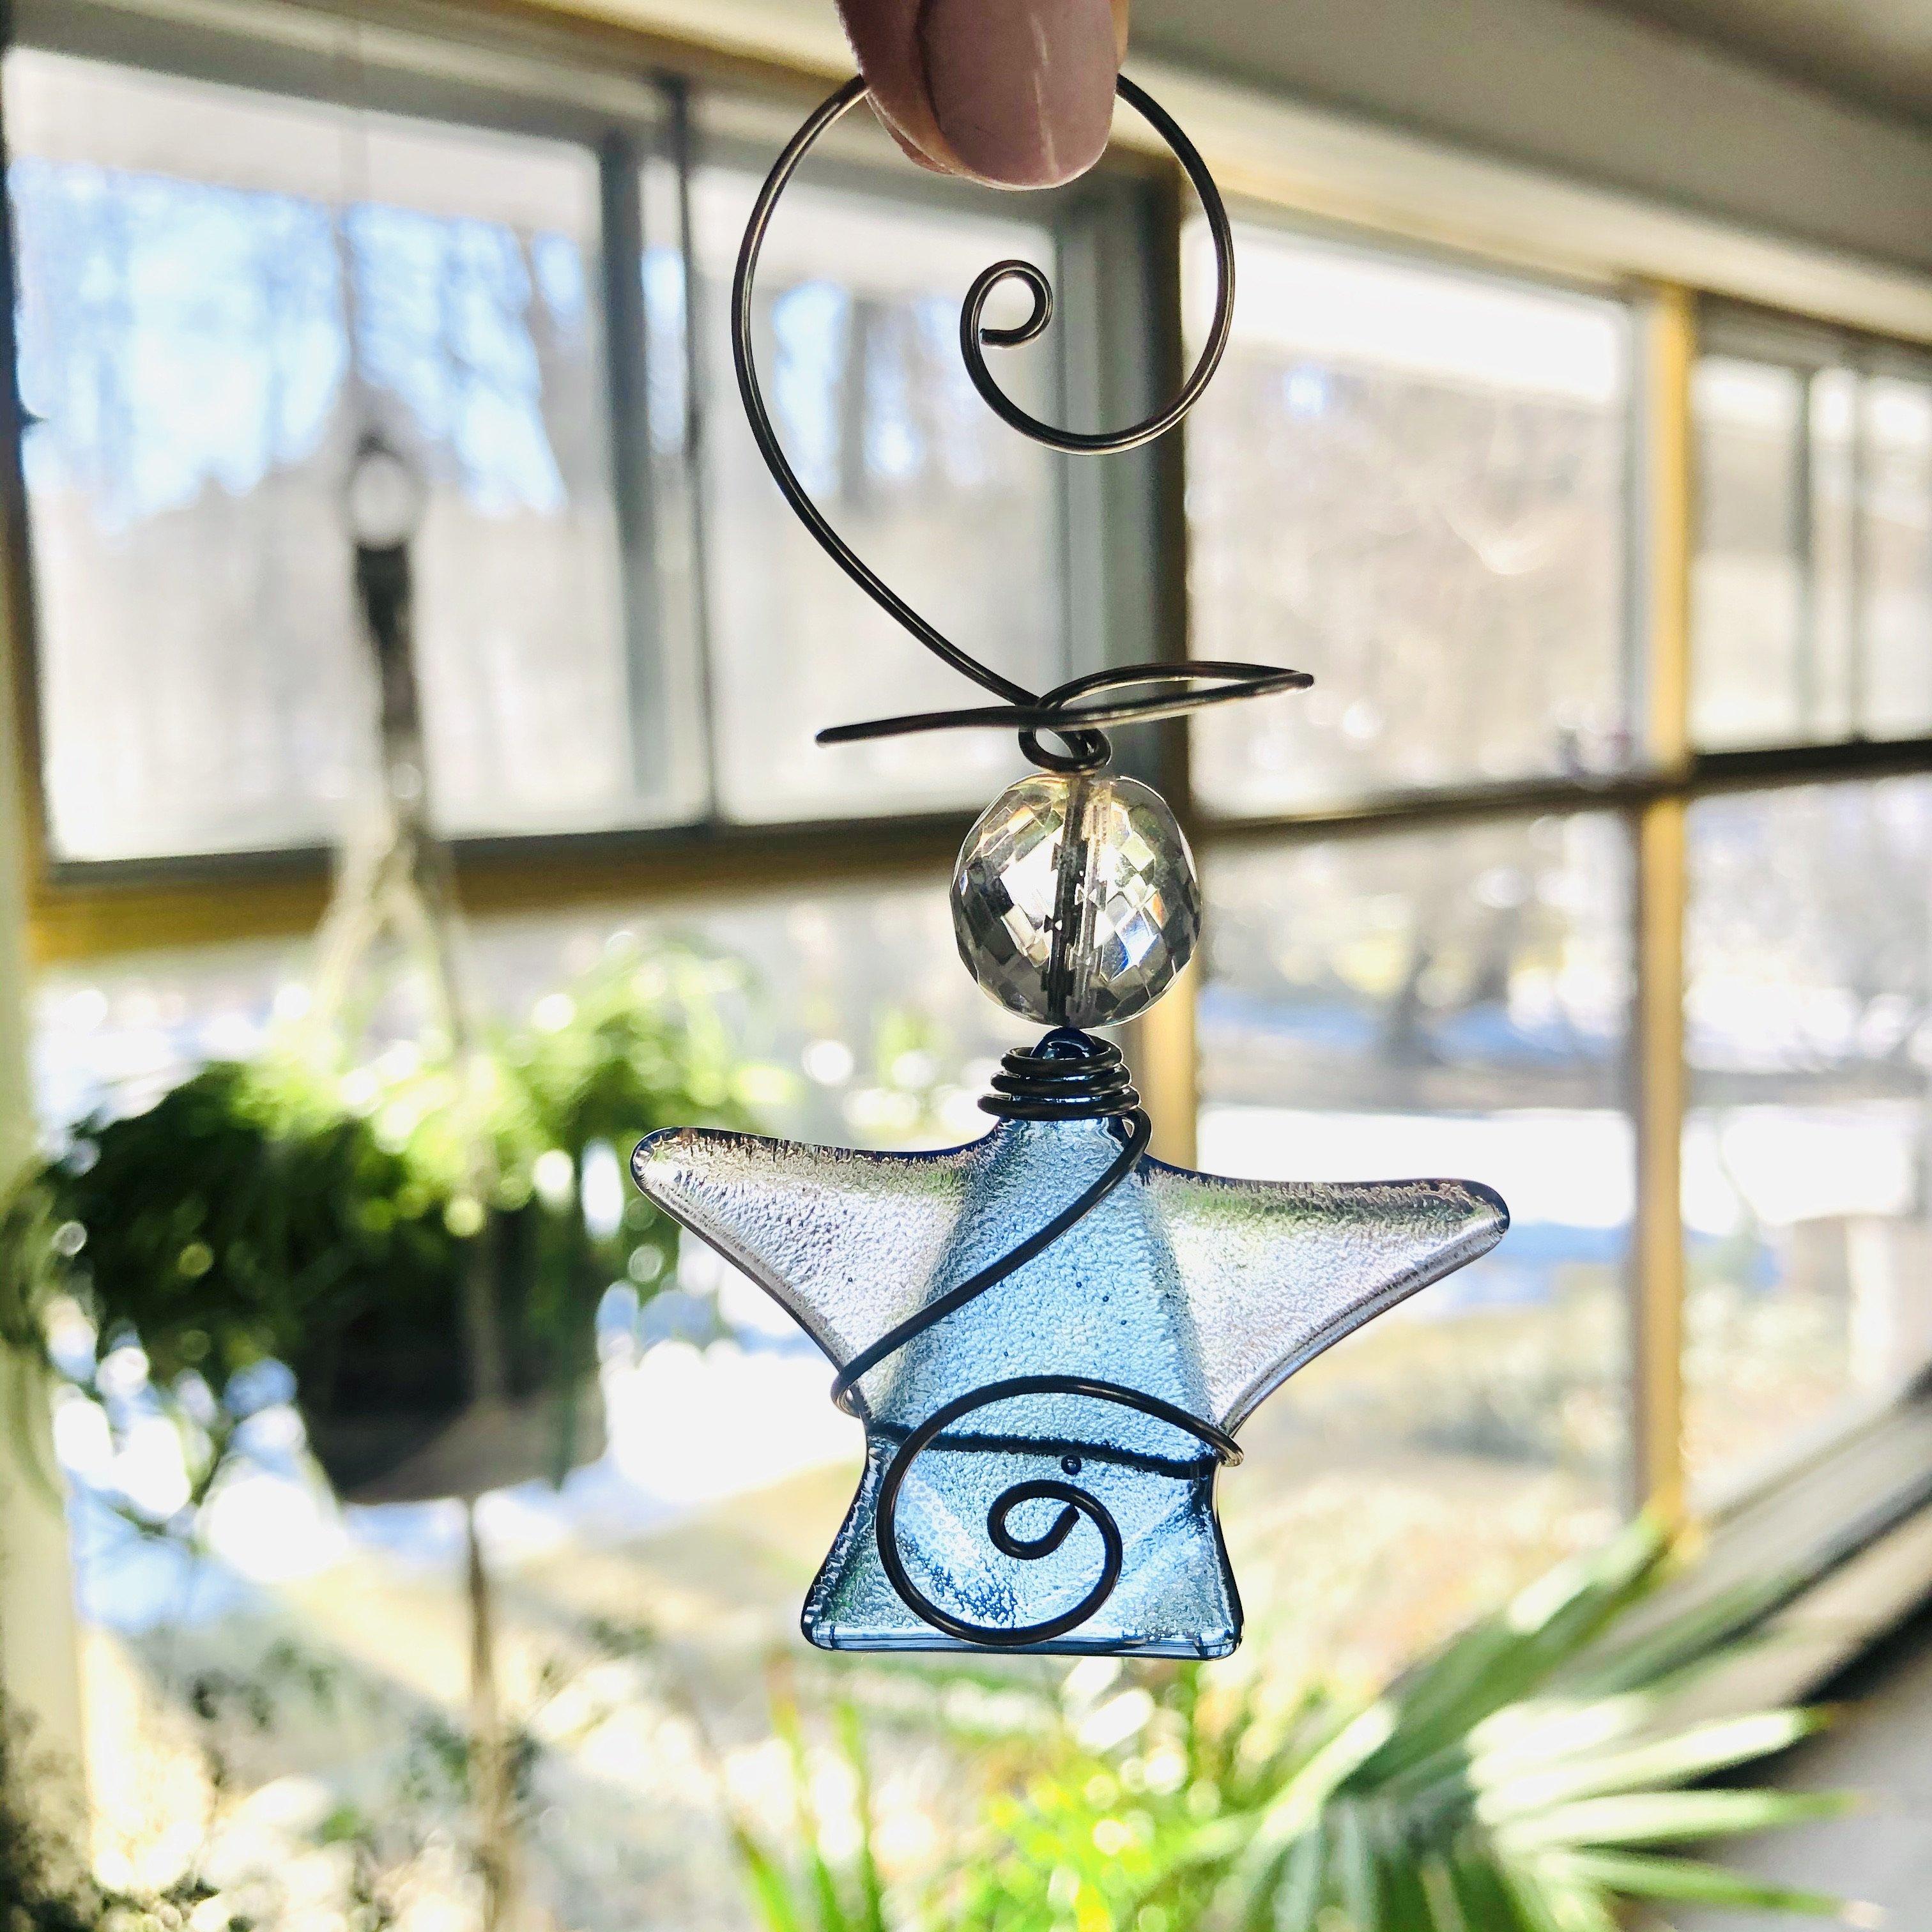 Stained Glass Christmas Bell, Christmas Bell, Bell for Christmas Tree  Ornament Accessory, Bell Suncatcher, Christmas Gift, Christmas Decor 